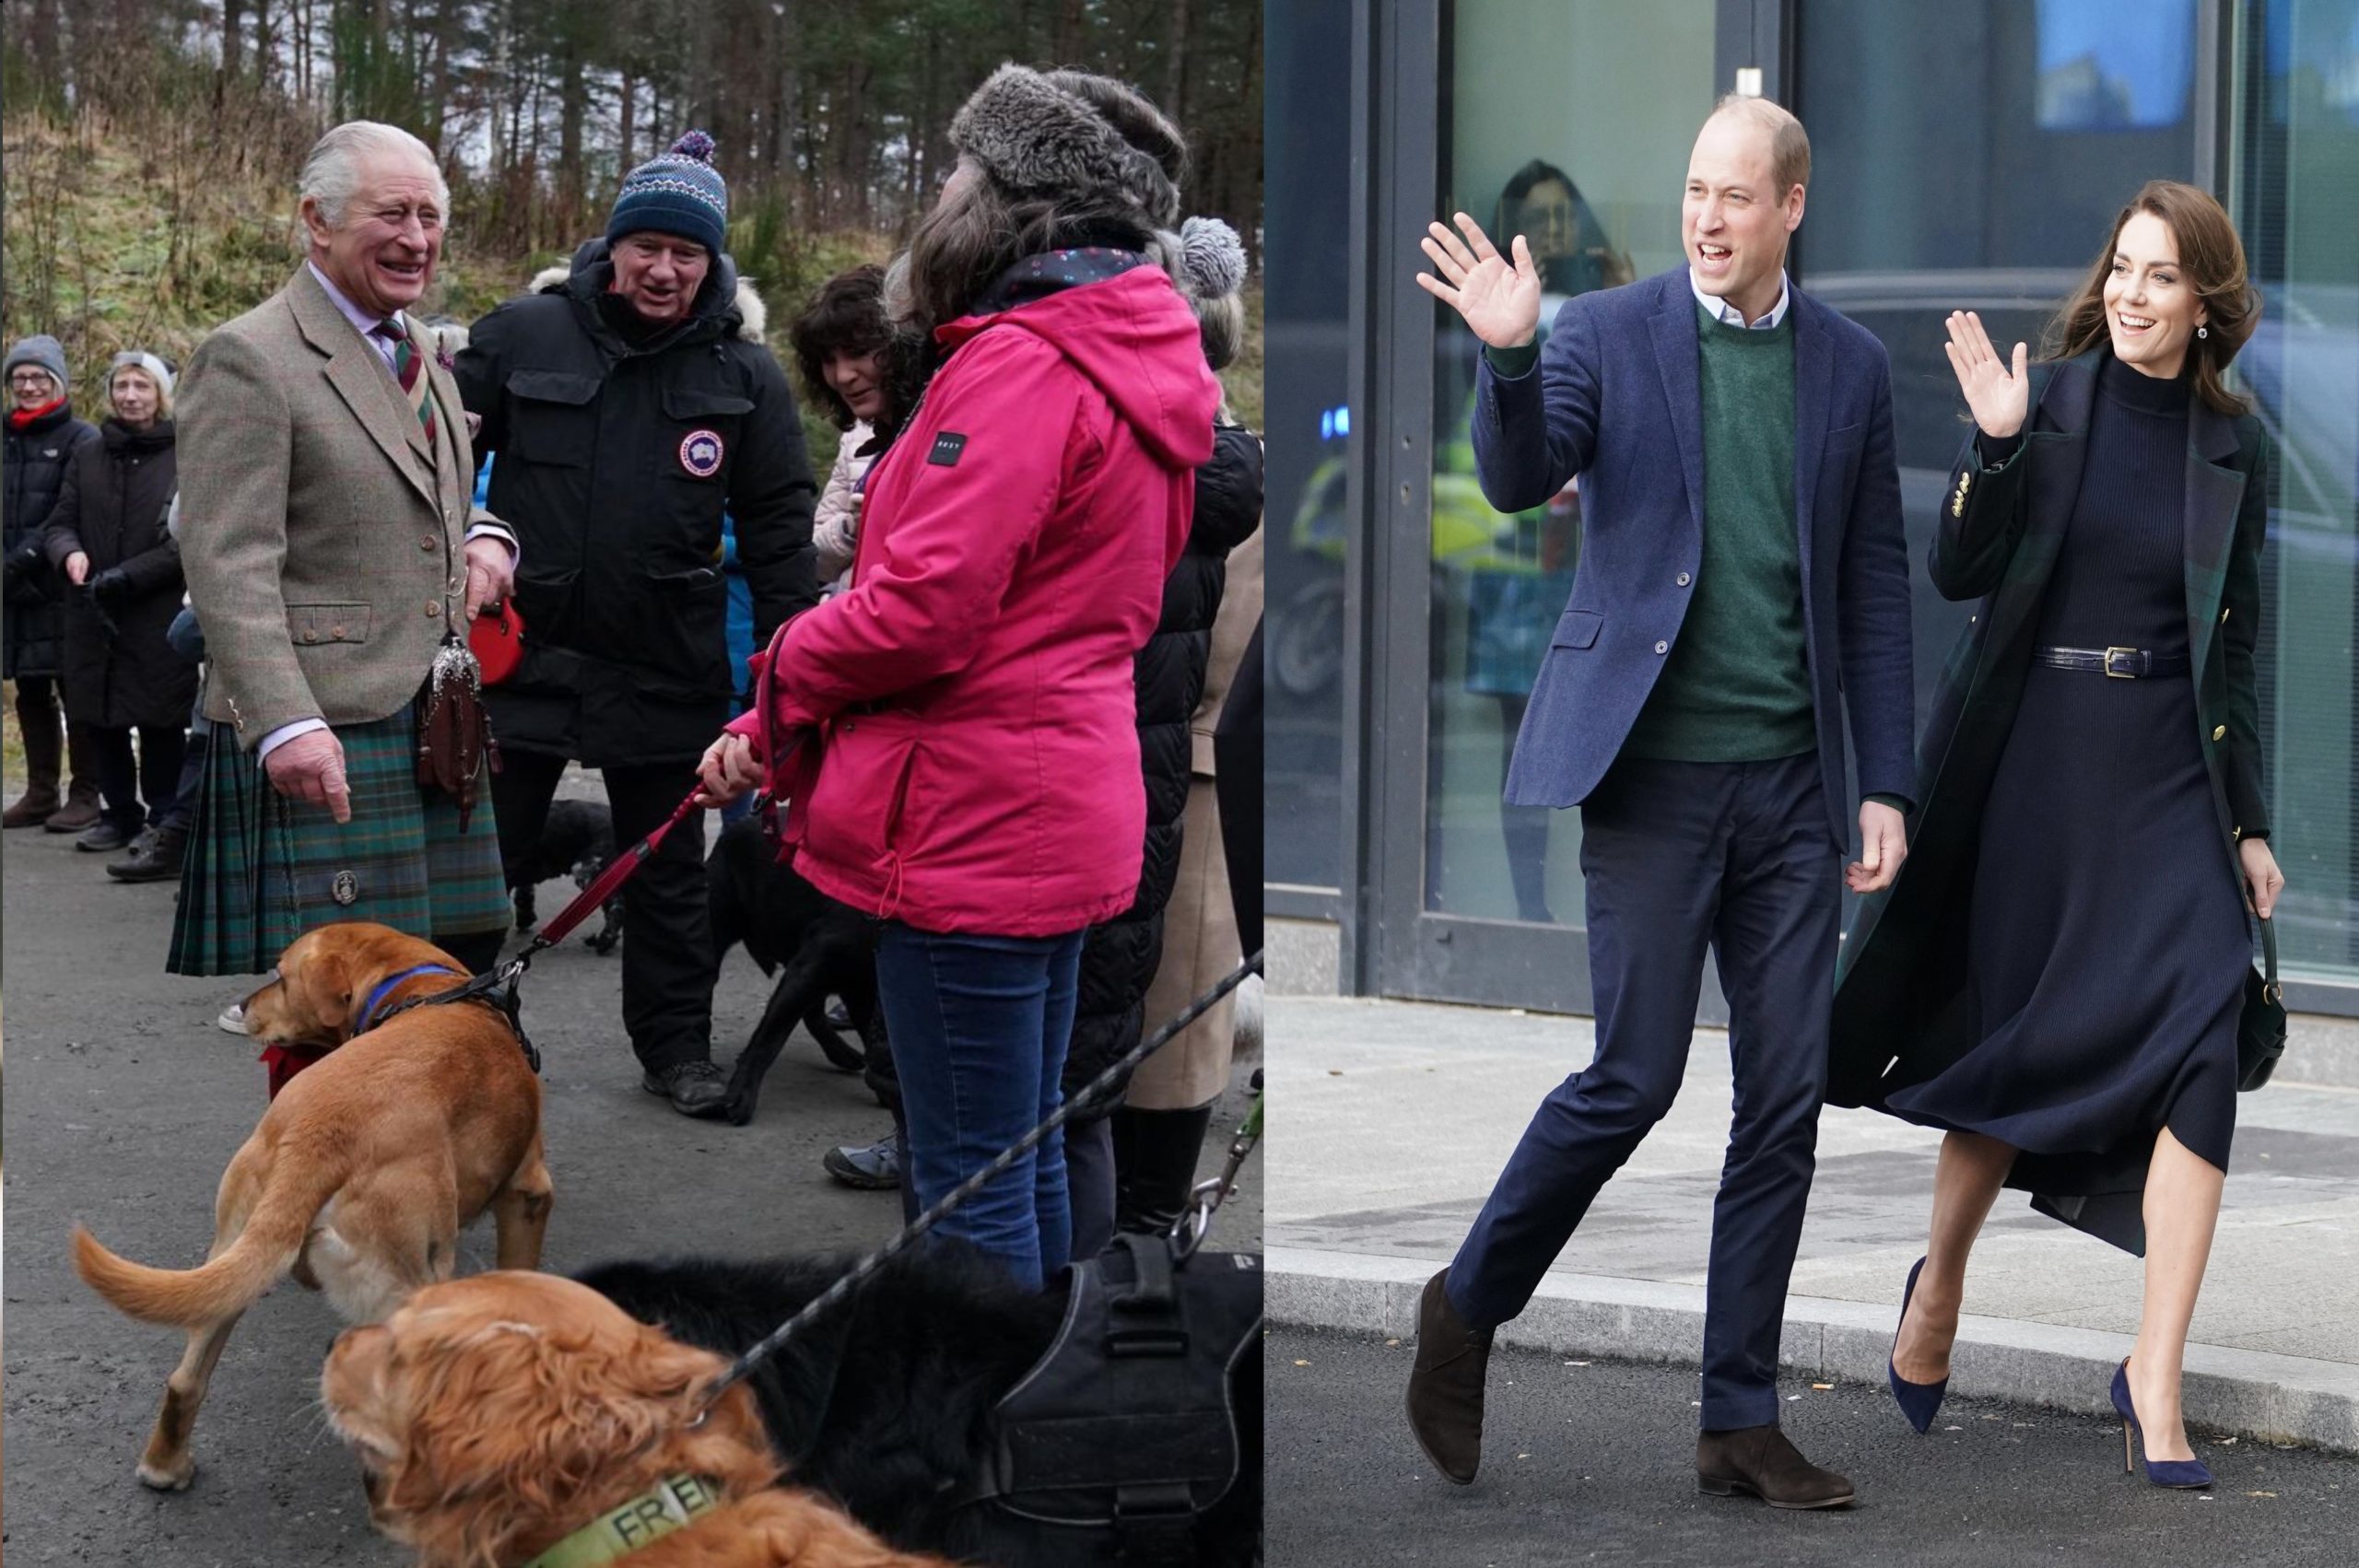 Watch: King Charles III, Prince and Princess of Wales, William and Kate Make Public Appearances, Welcomed by Cheering Fans